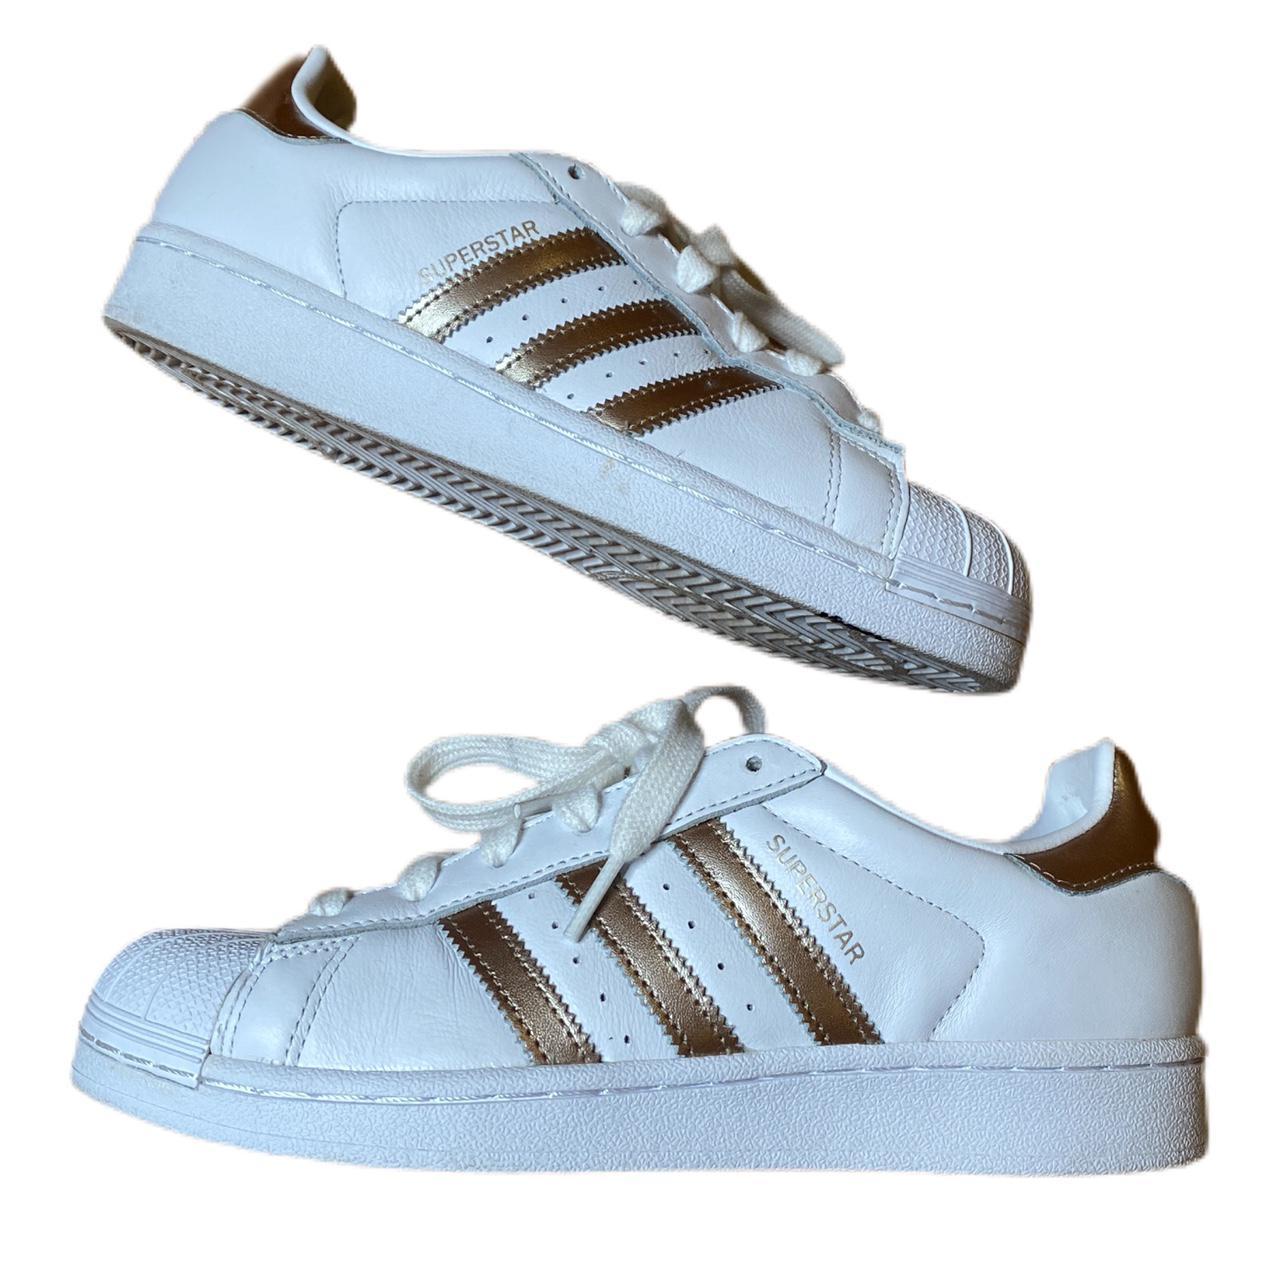 Product Image 1 - Adidas superstar white and gold